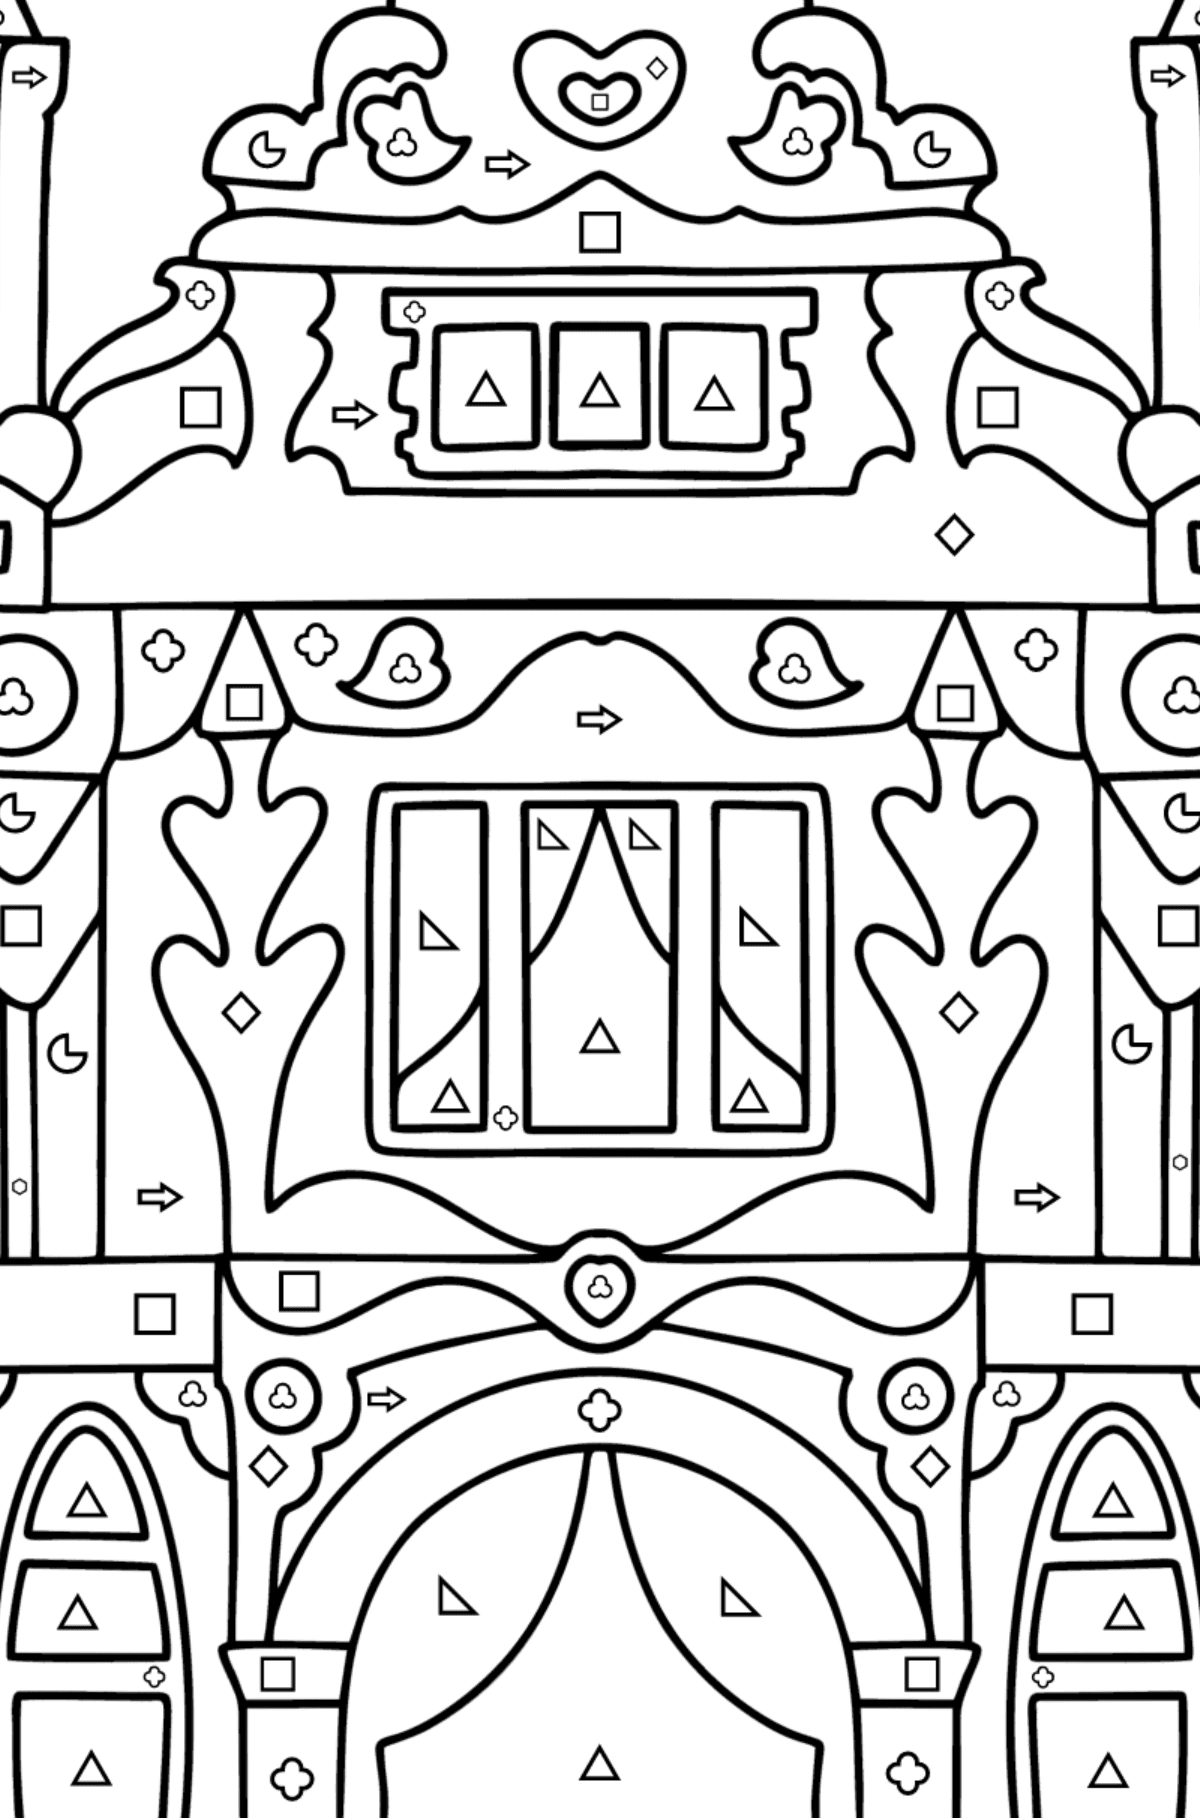 Two Storey House coloring page - Coloring by Geometric Shapes for Kids